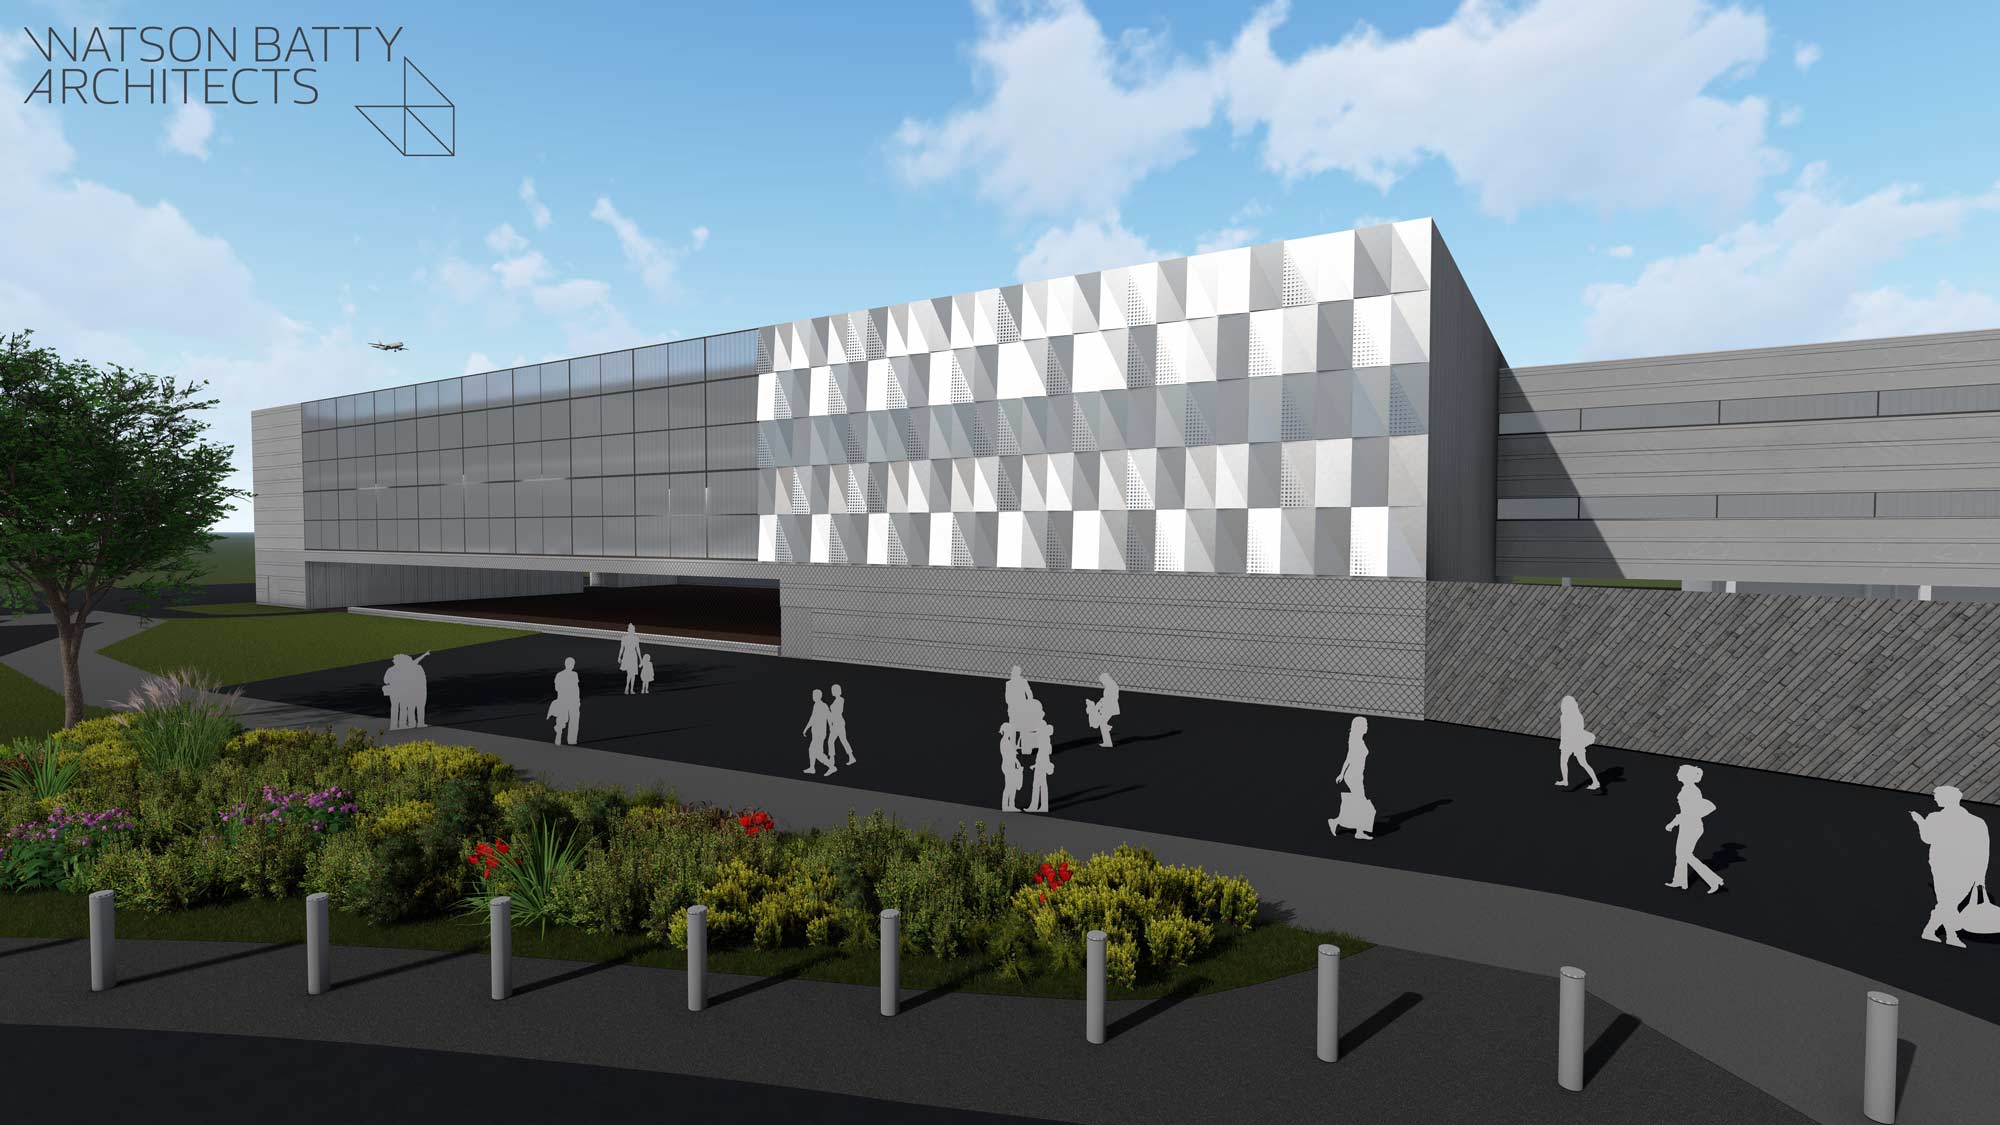 Plans for a major extension to the main airport terminal building at Leeds Bradford Airport (LBA) have been approved by Leeds City Council.